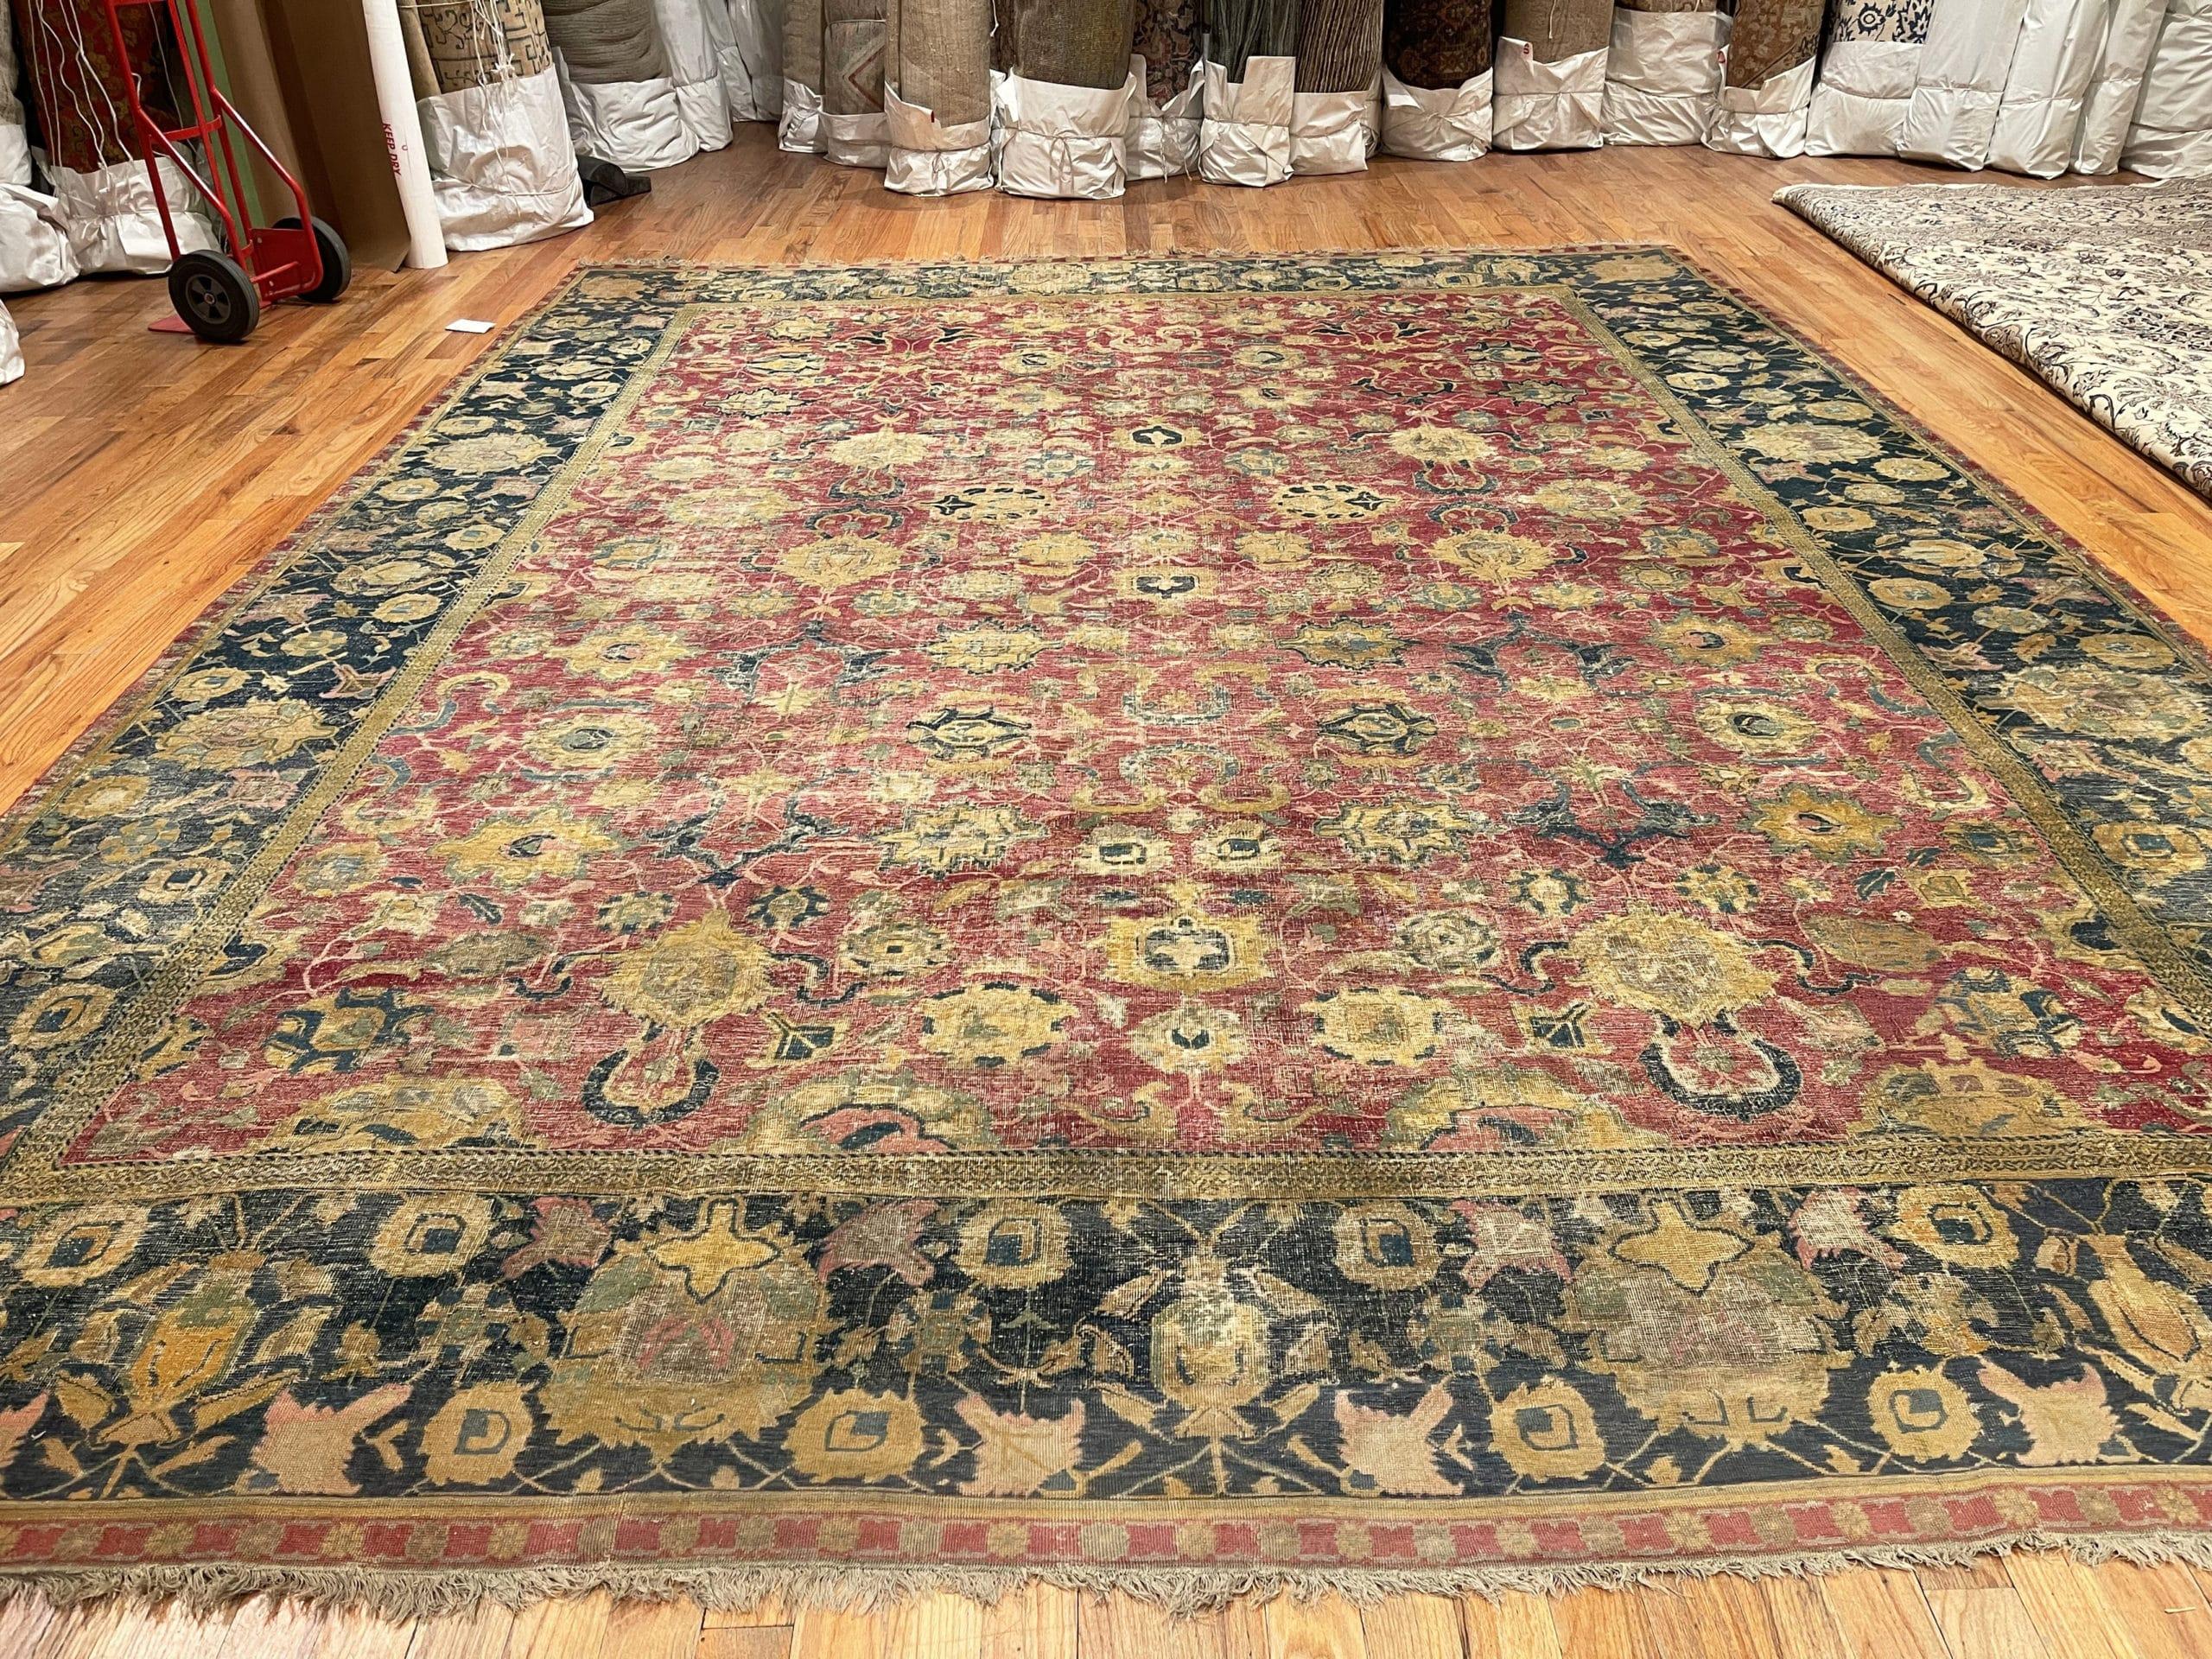 A Breathtaking Rare 17th Century Large Antique Persian Isfahan Rug 12'3